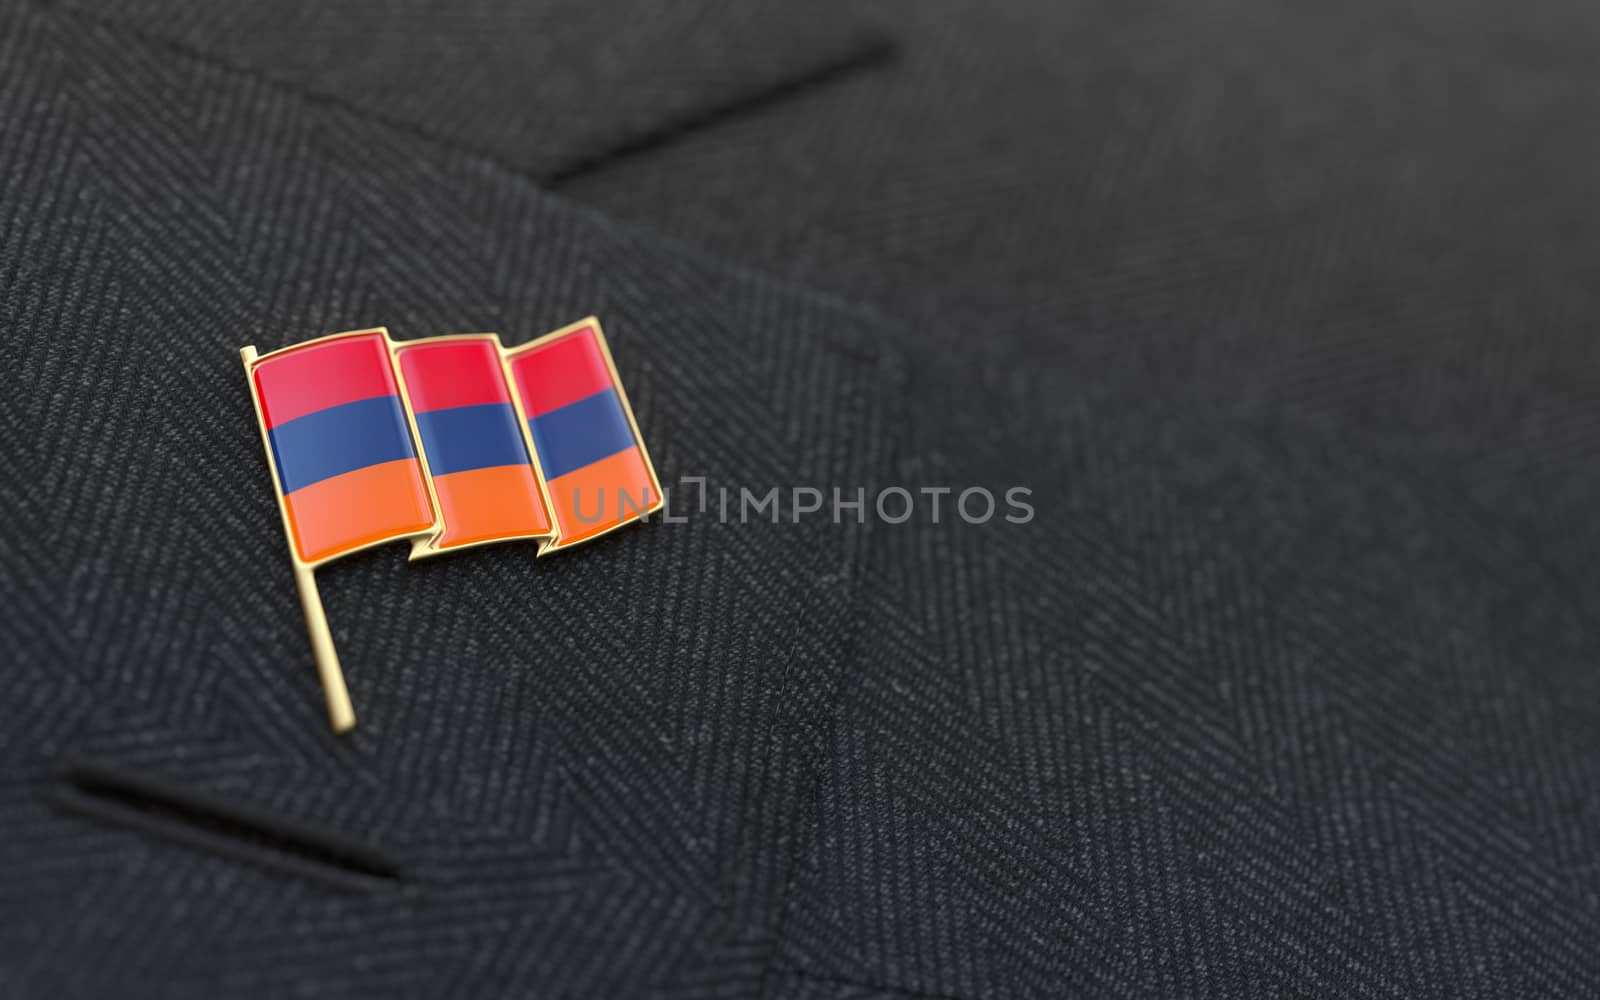 Armenia flag lapel pin on the collar of a business suit jacket shows patriotism